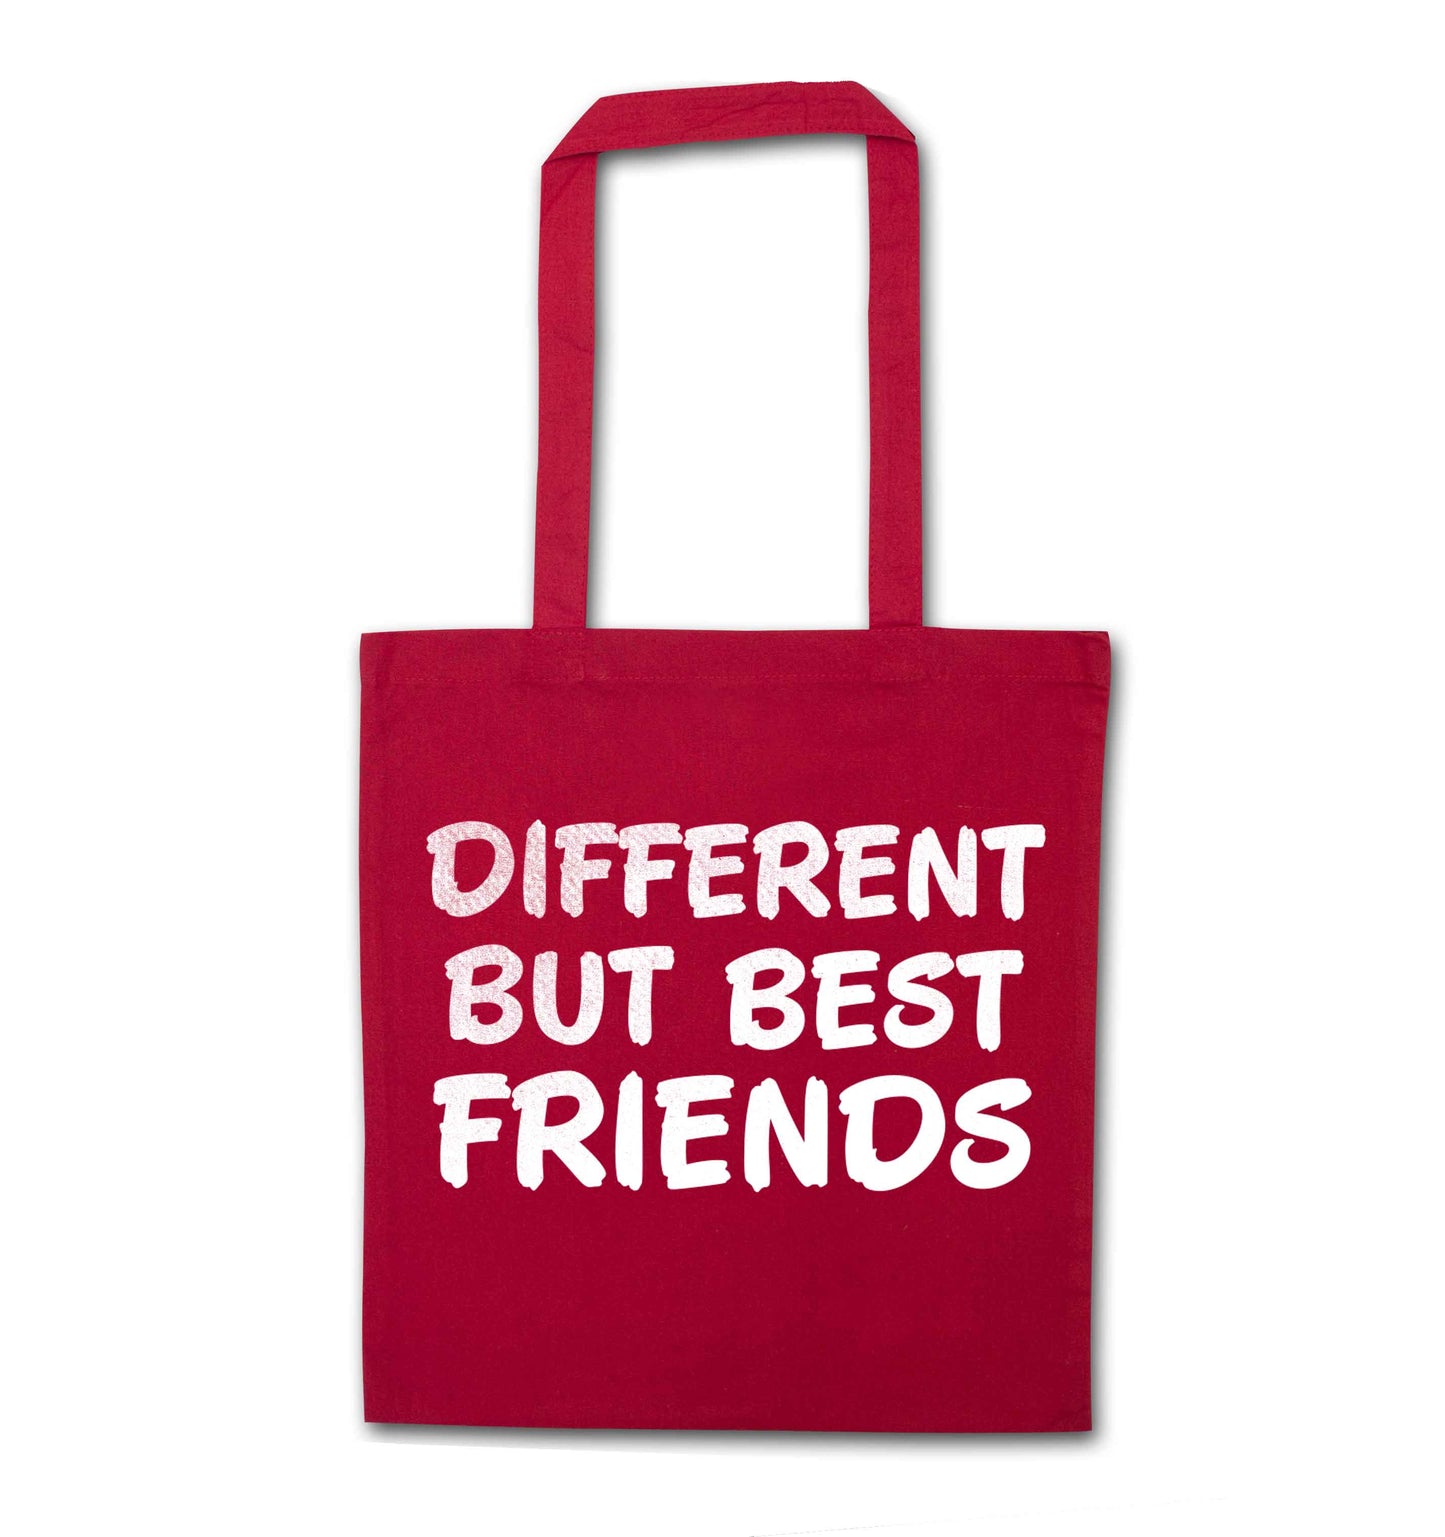 Different but best friends red tote bag